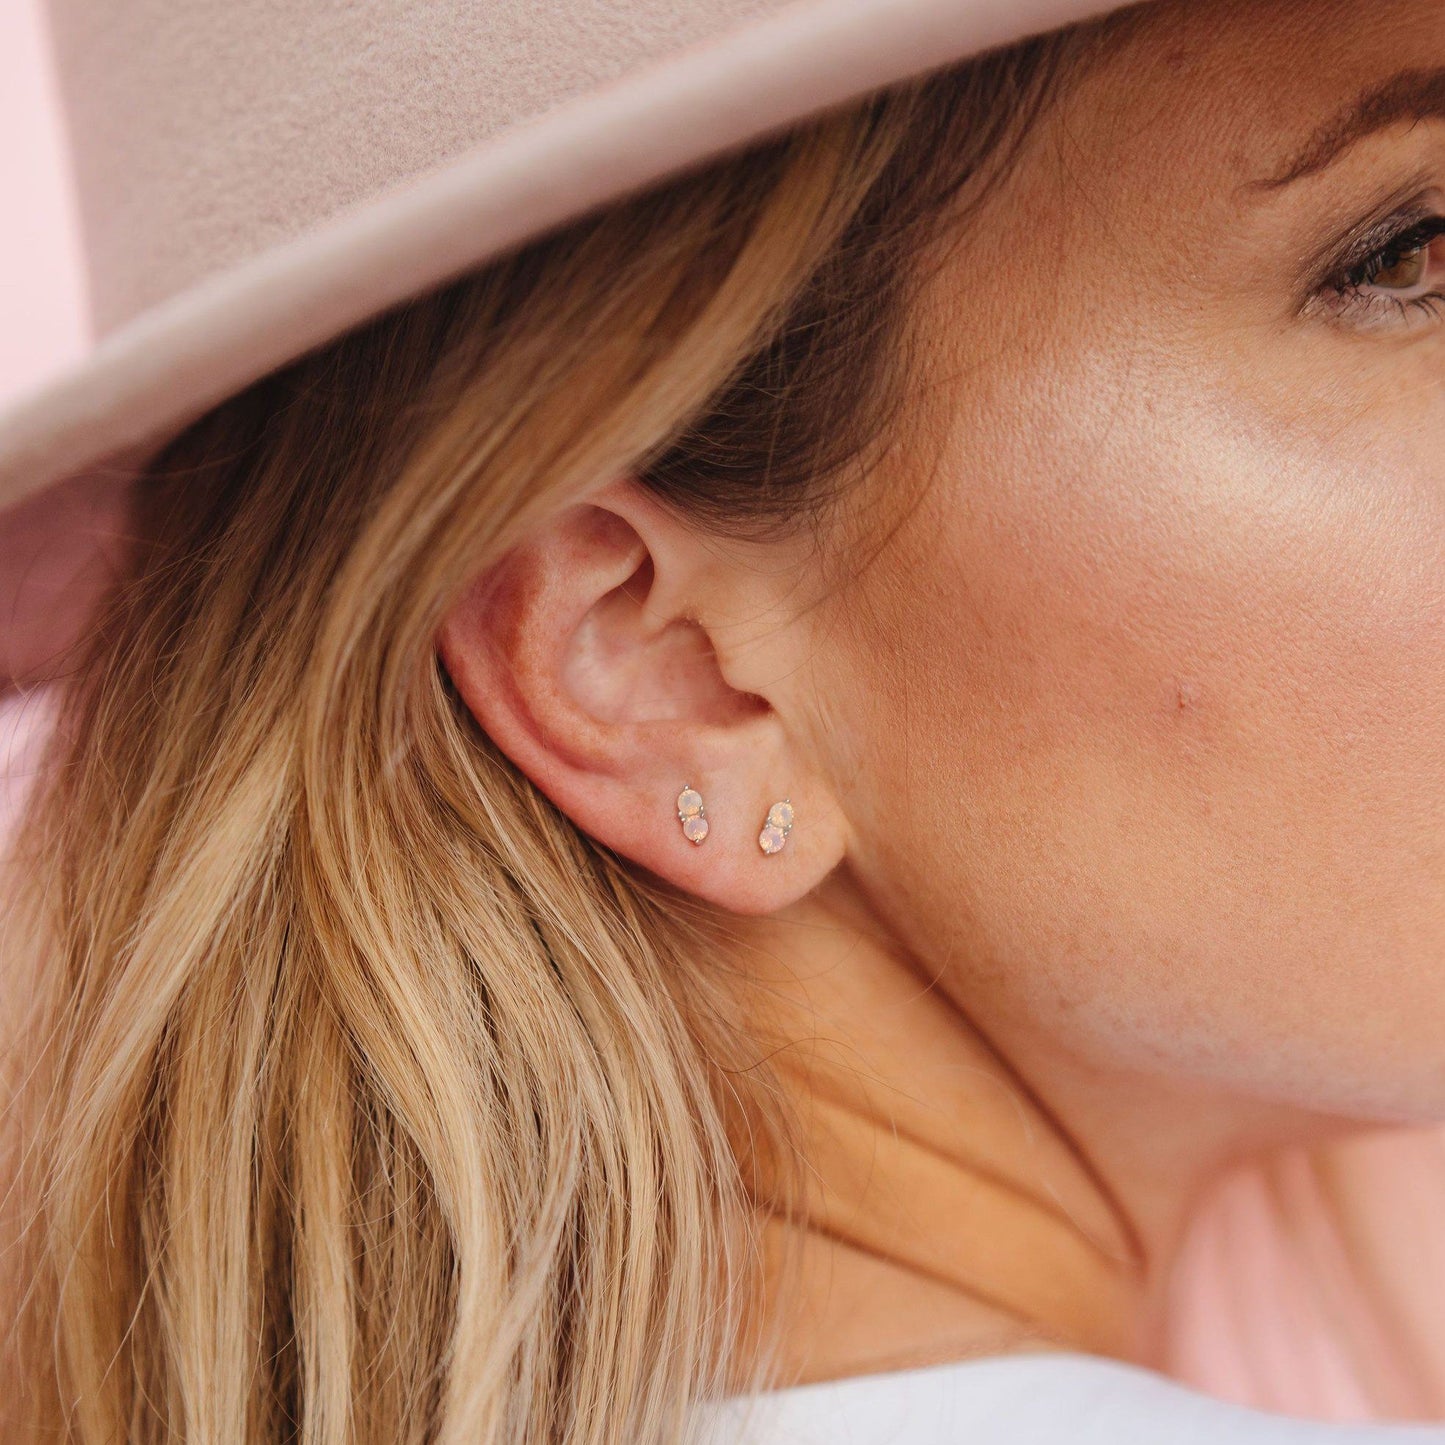 Chloe + Lois Cotton Candy Twinkle Studs